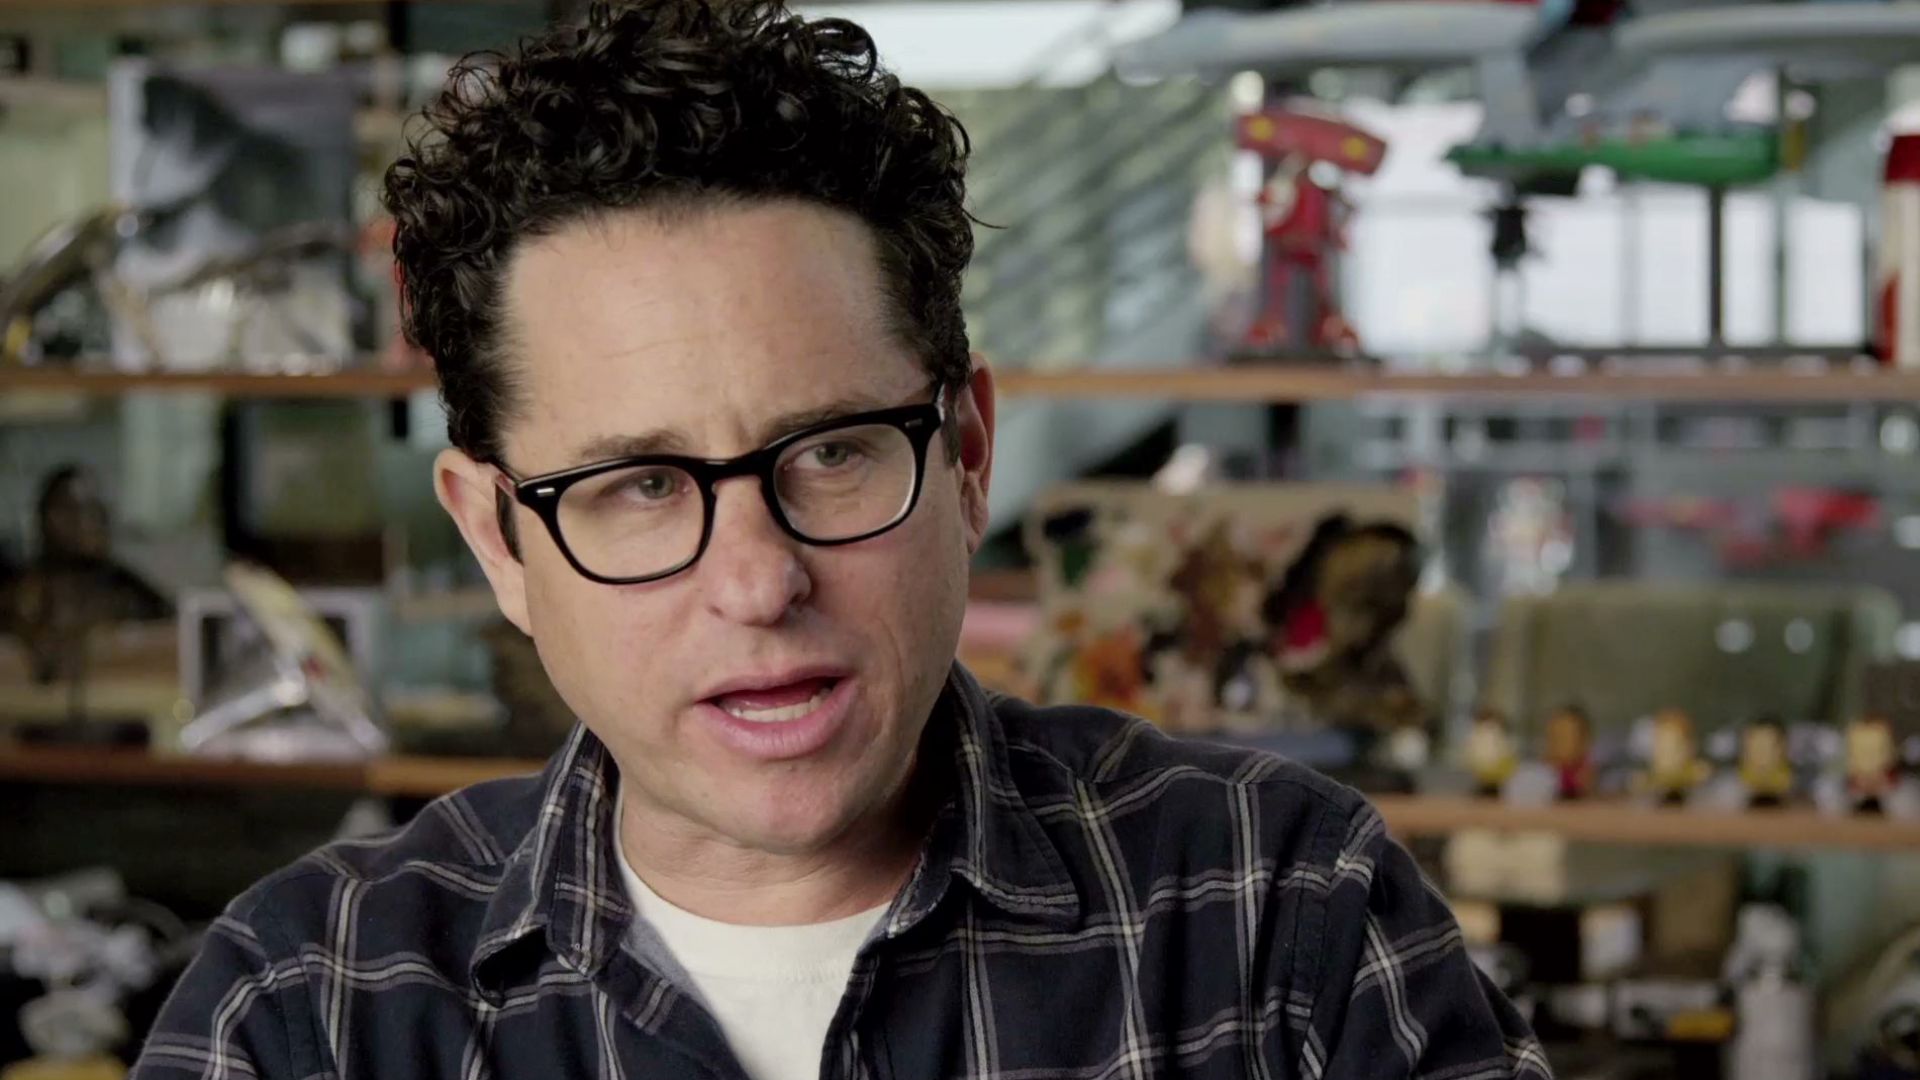 J.J. Abrams on the challanges of creating Star Trek Into Darkness